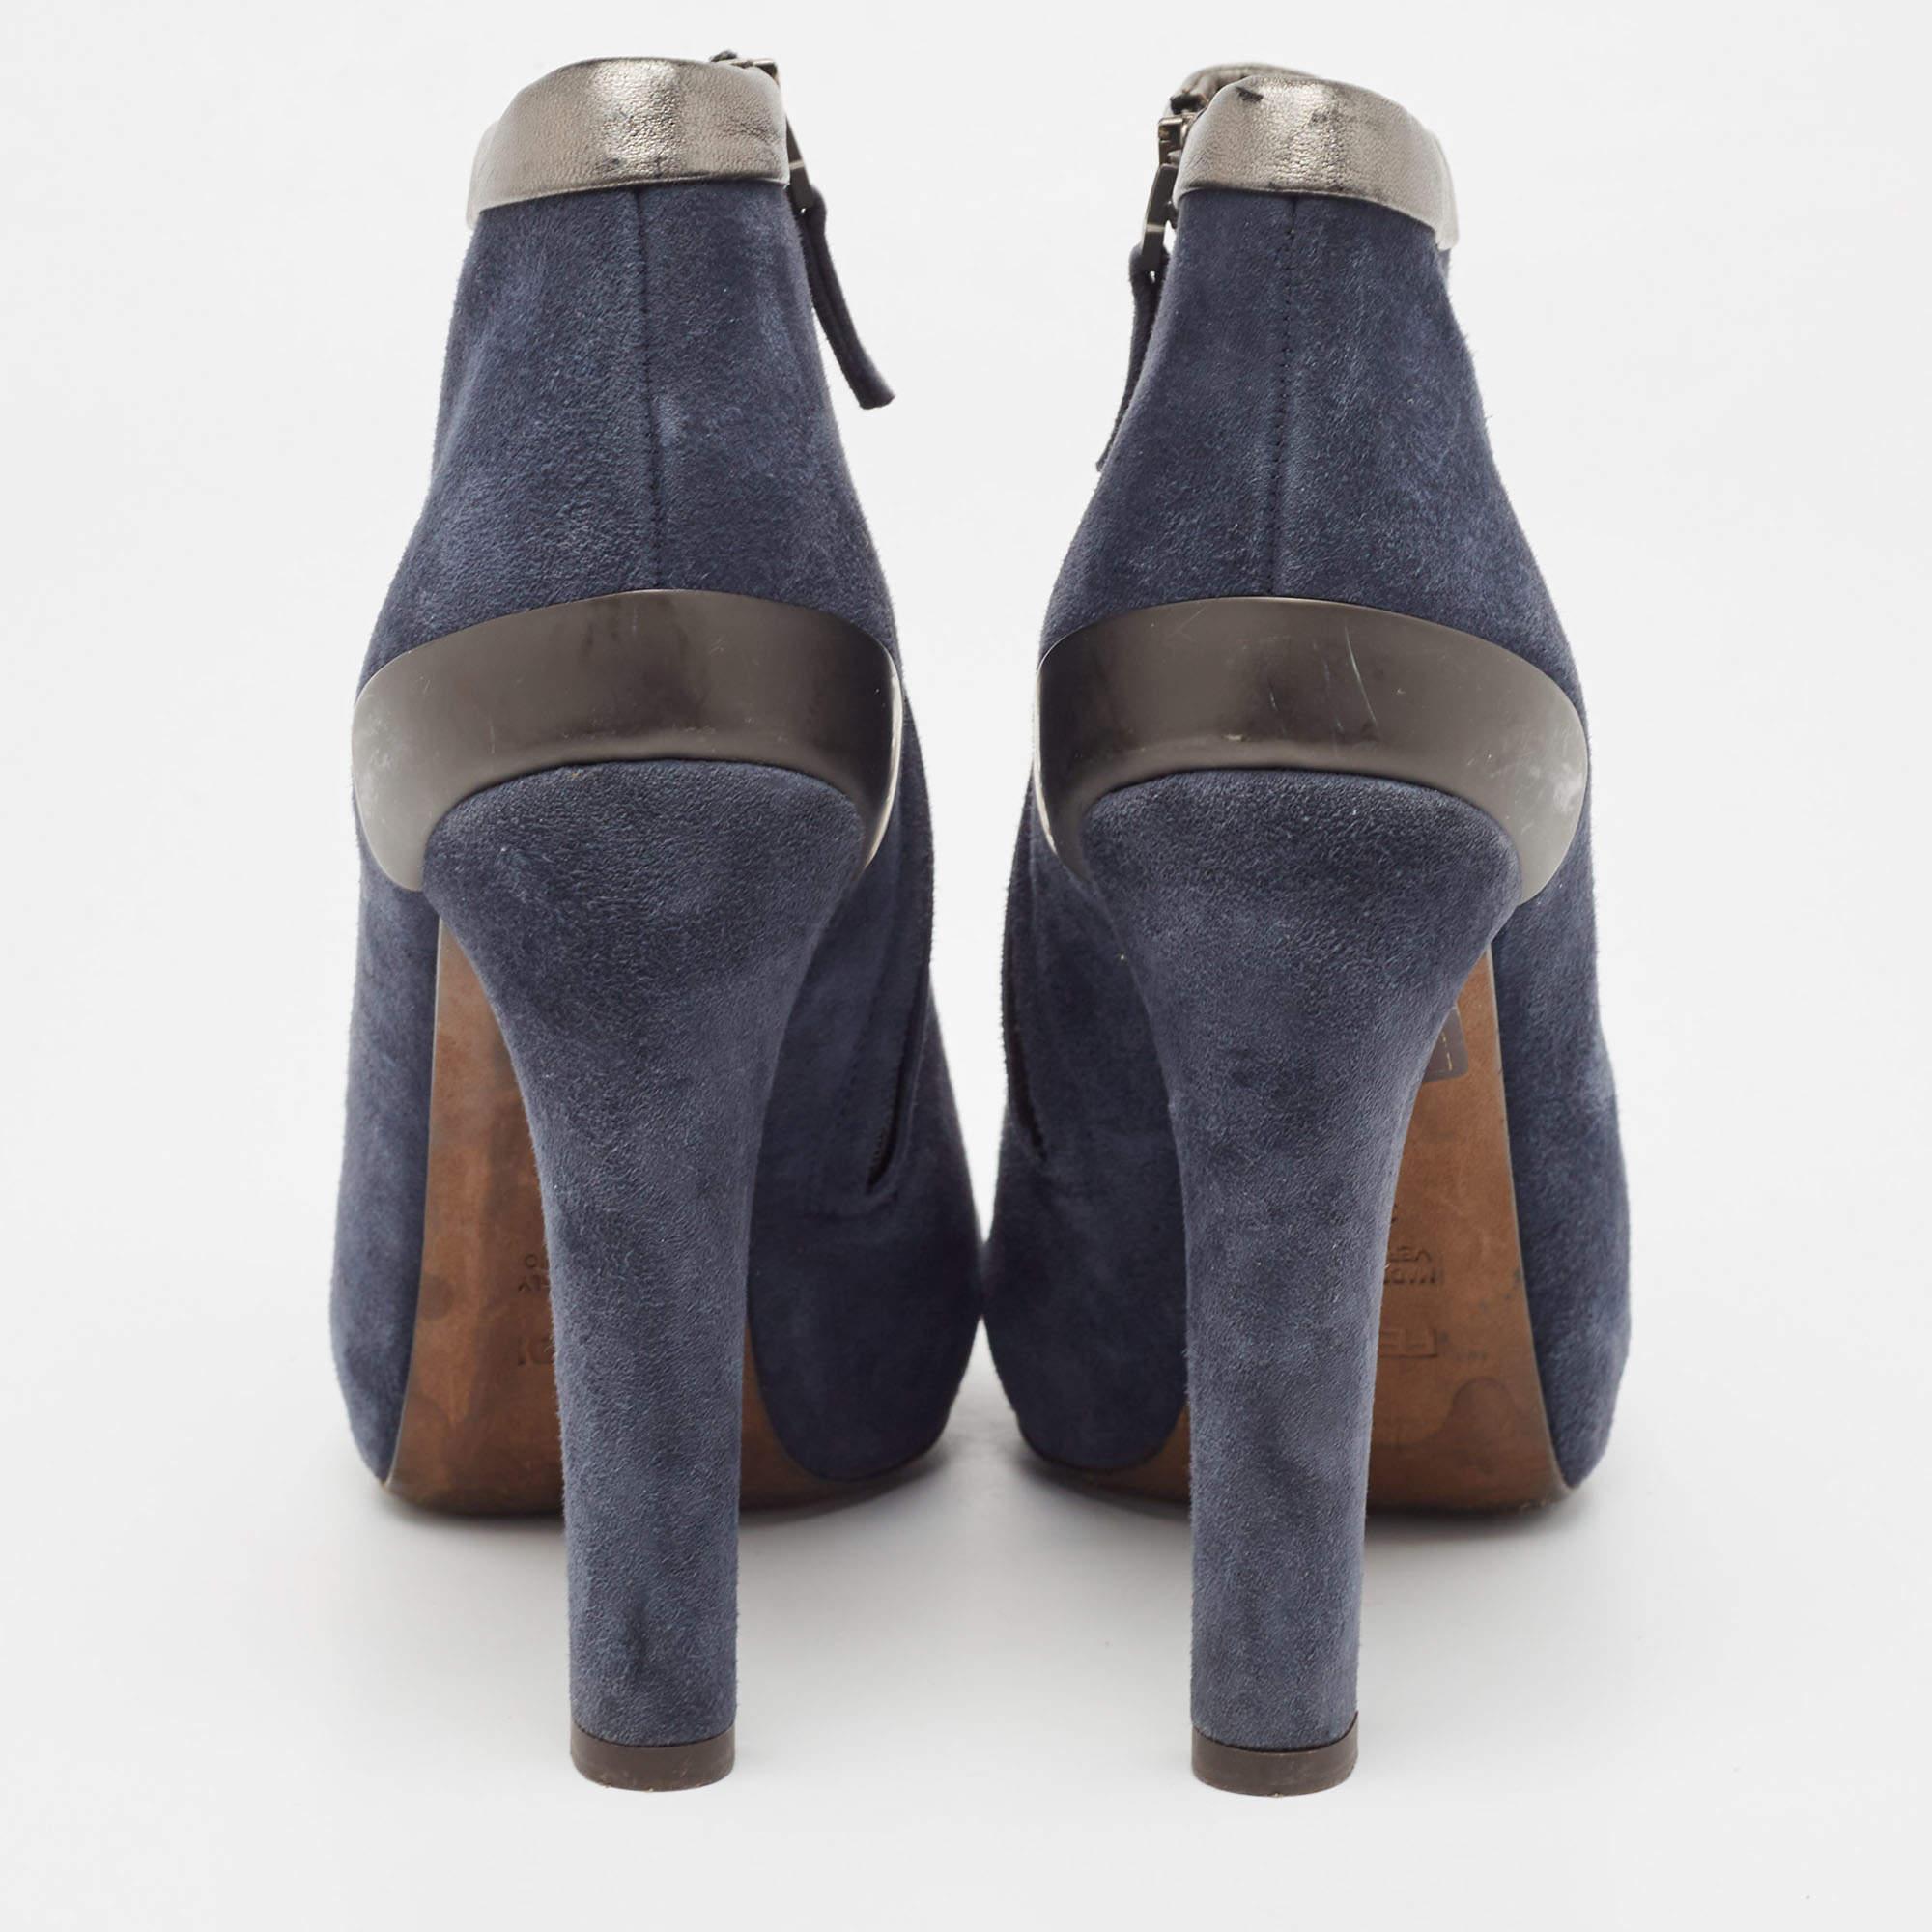 Fendi Navy Blue Suede Ankle Booties Size 39.5 2